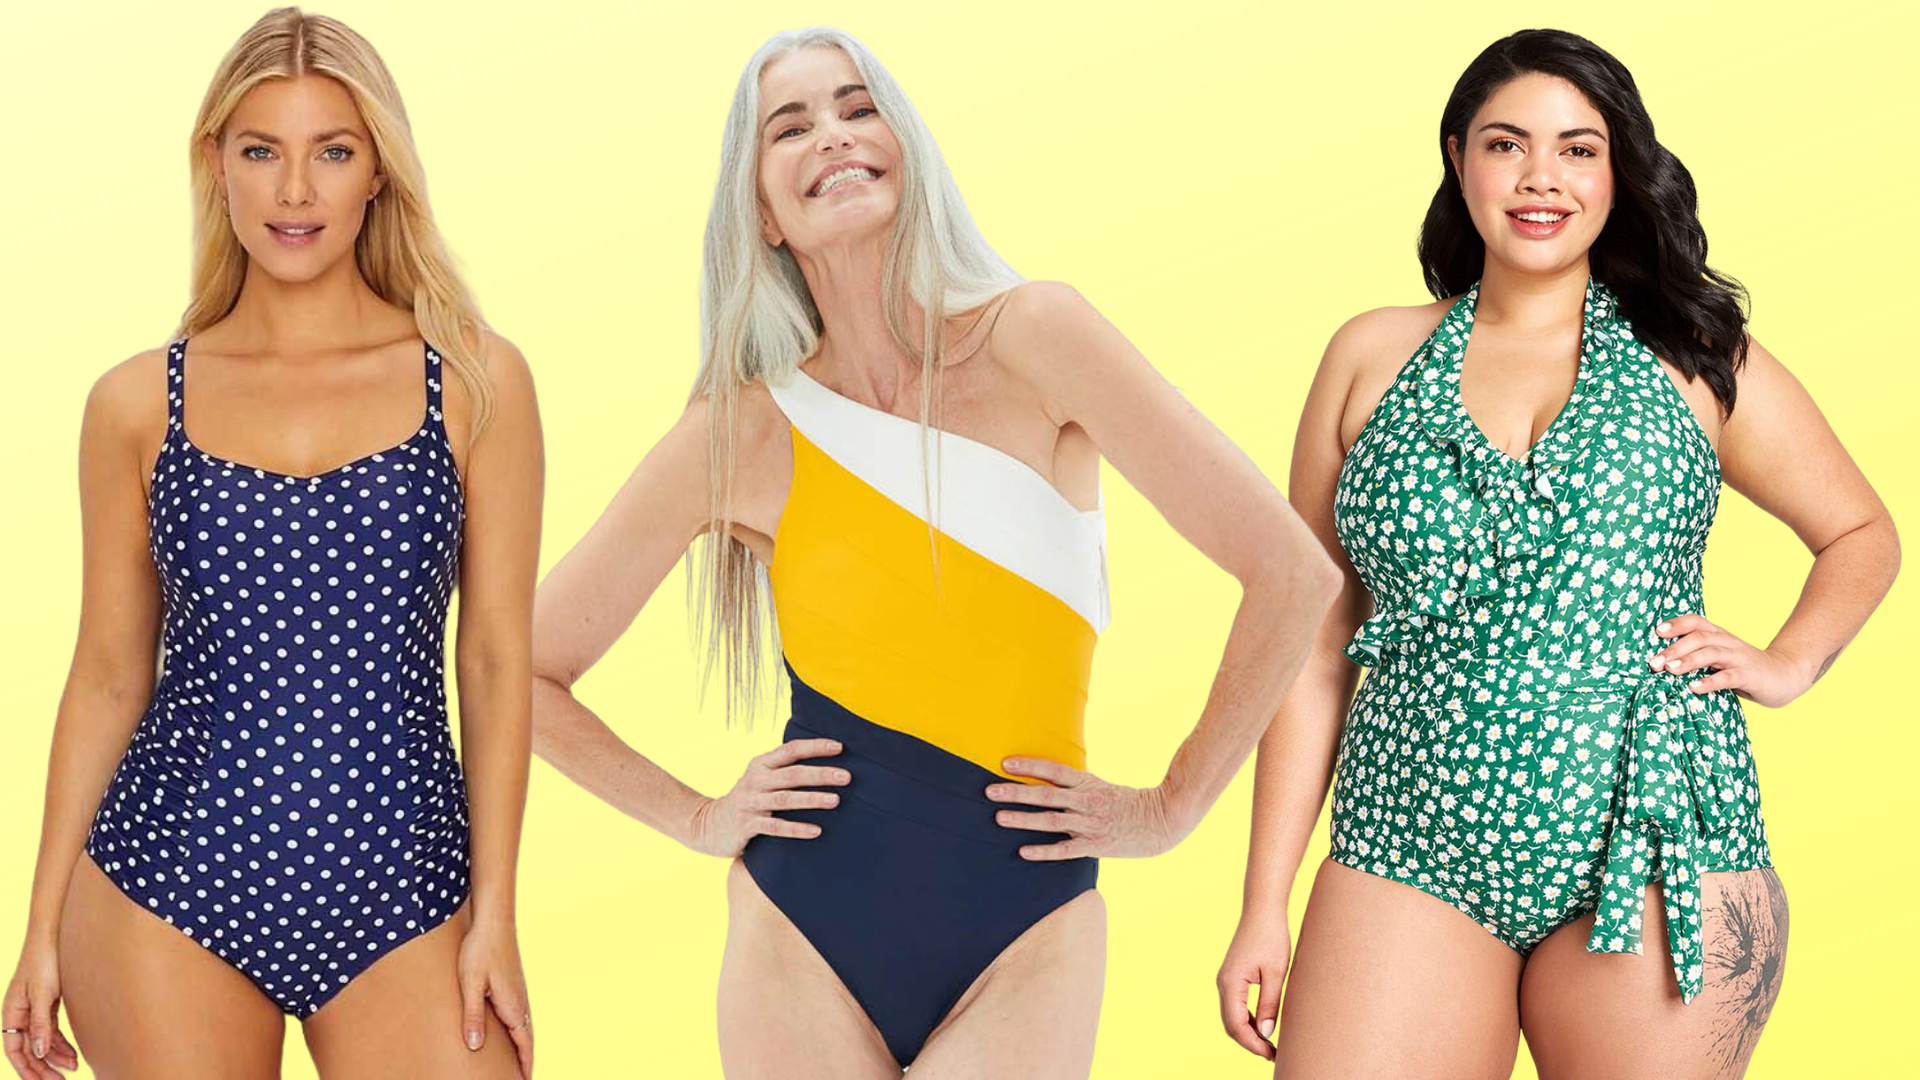 One Piece Swimsuits That Won't Make You Look Like Your Mother